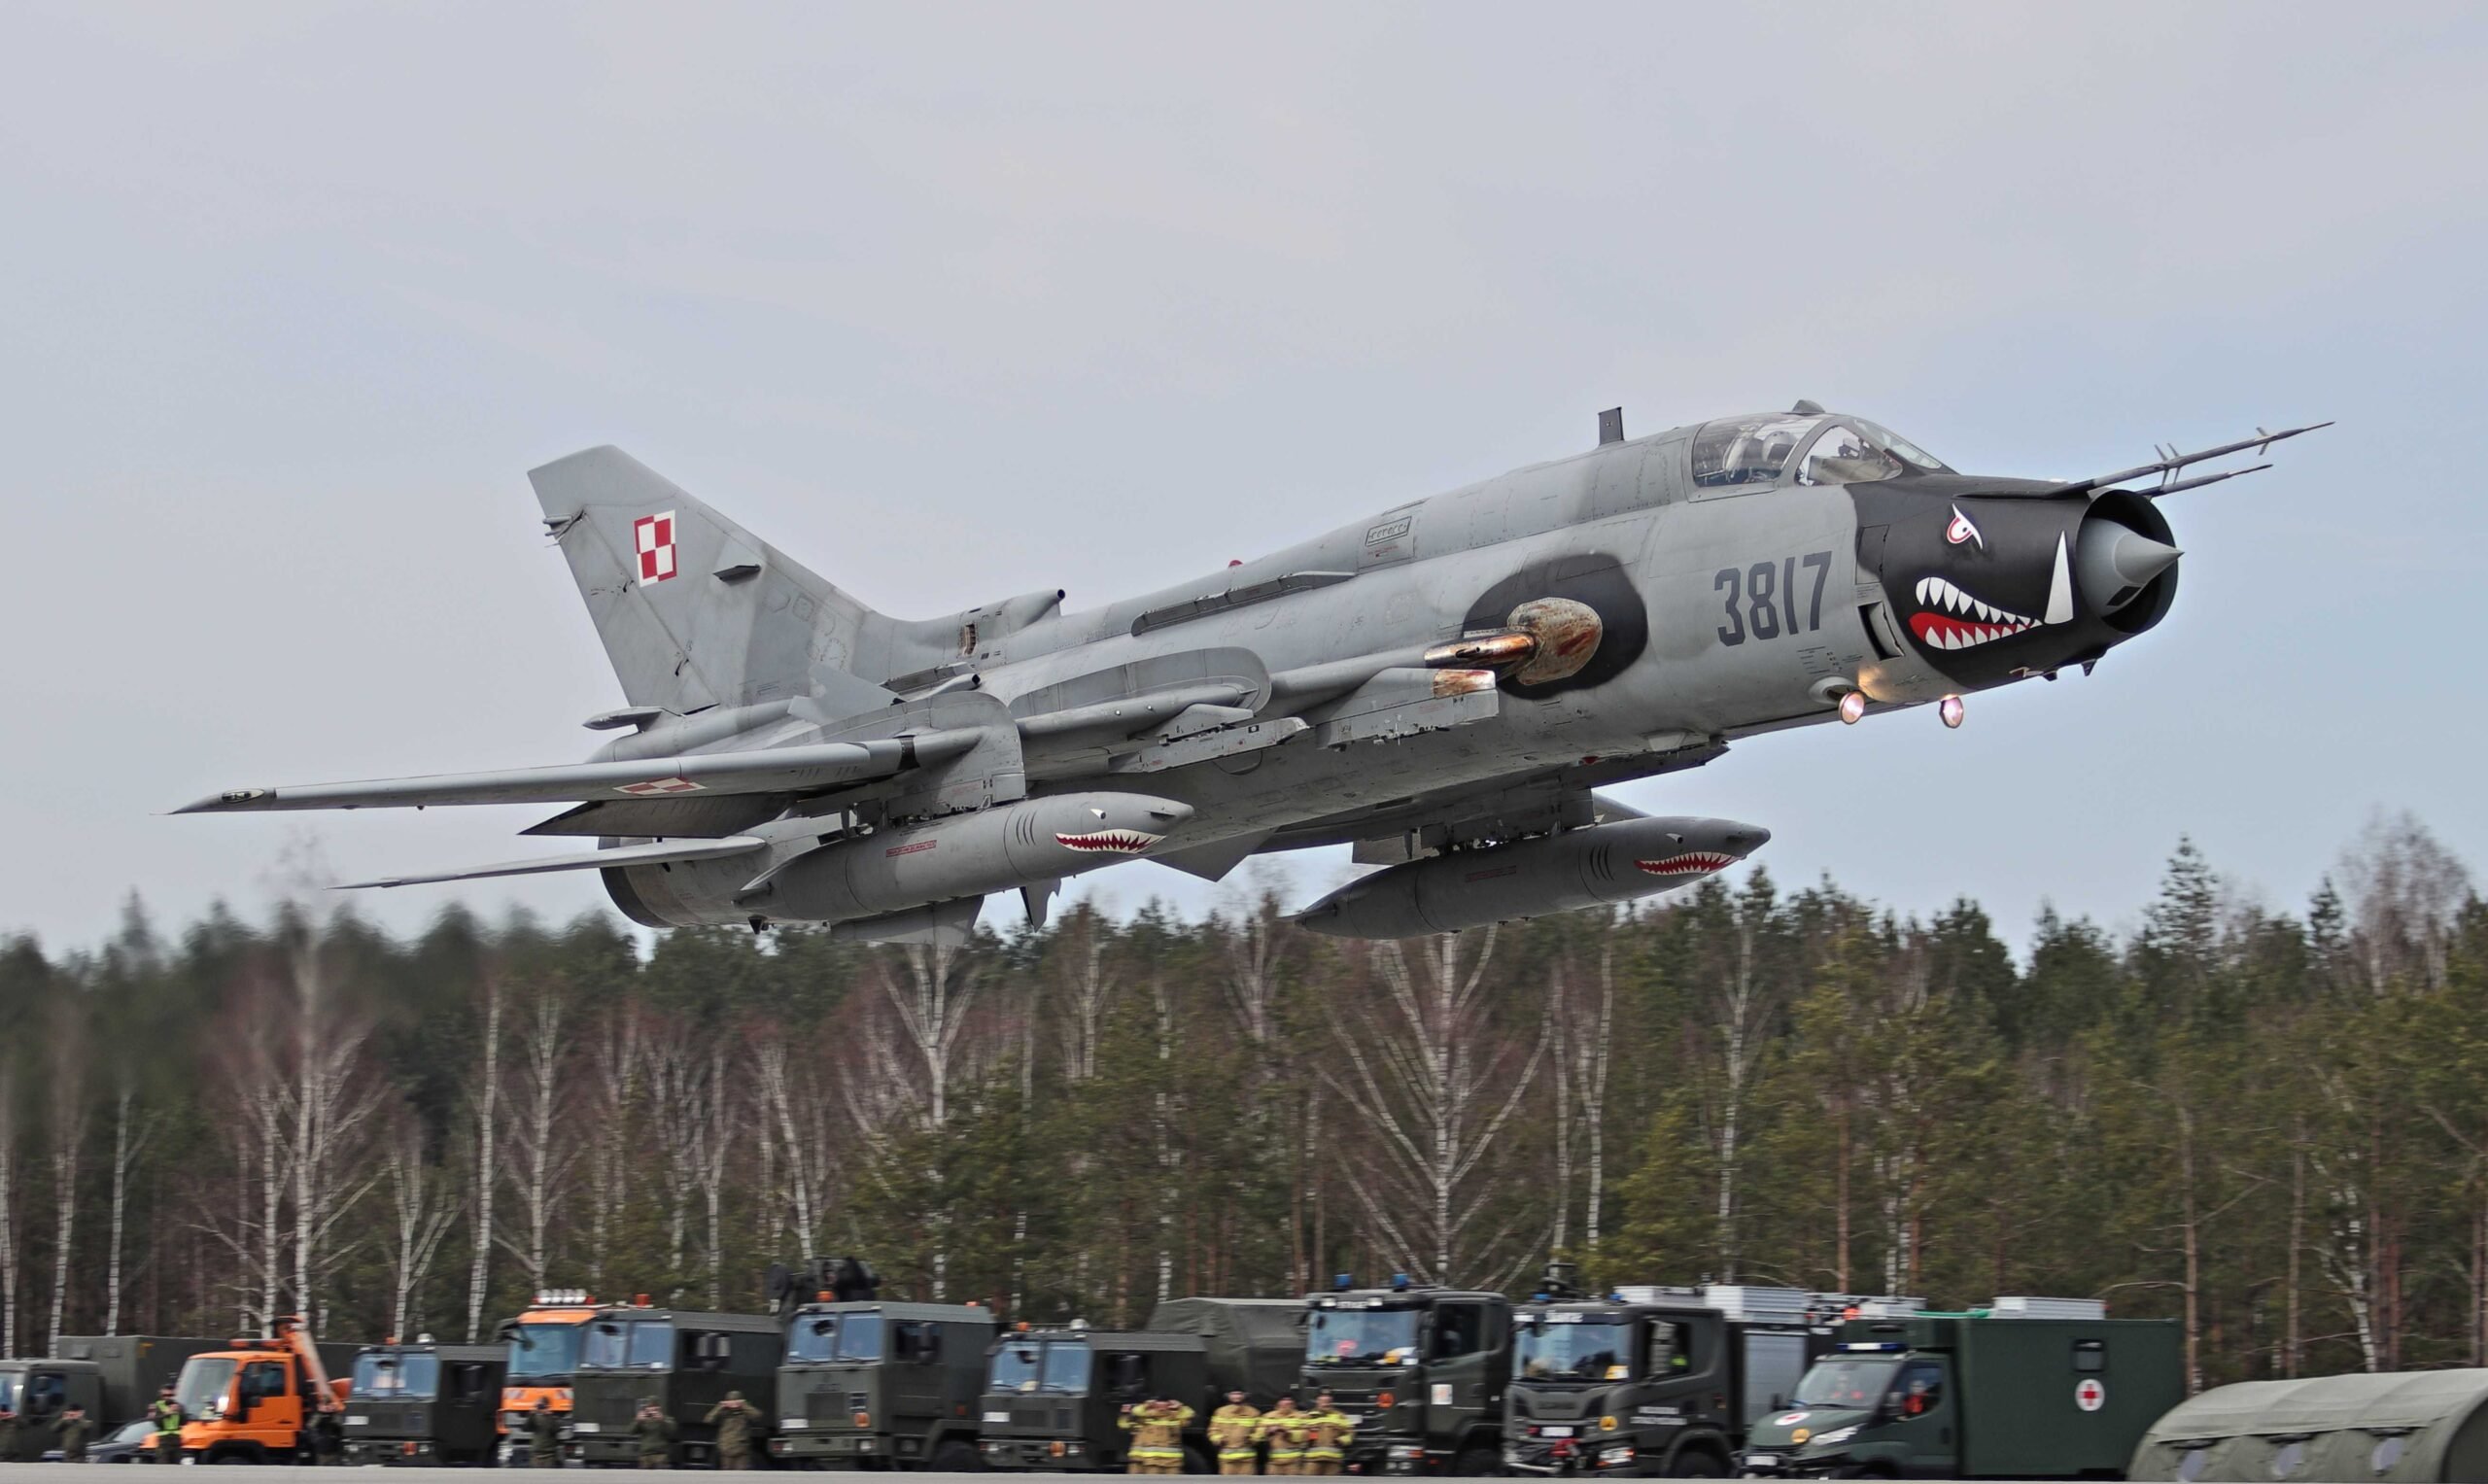 In Poland, jets return to the road – with Italian friends in tow